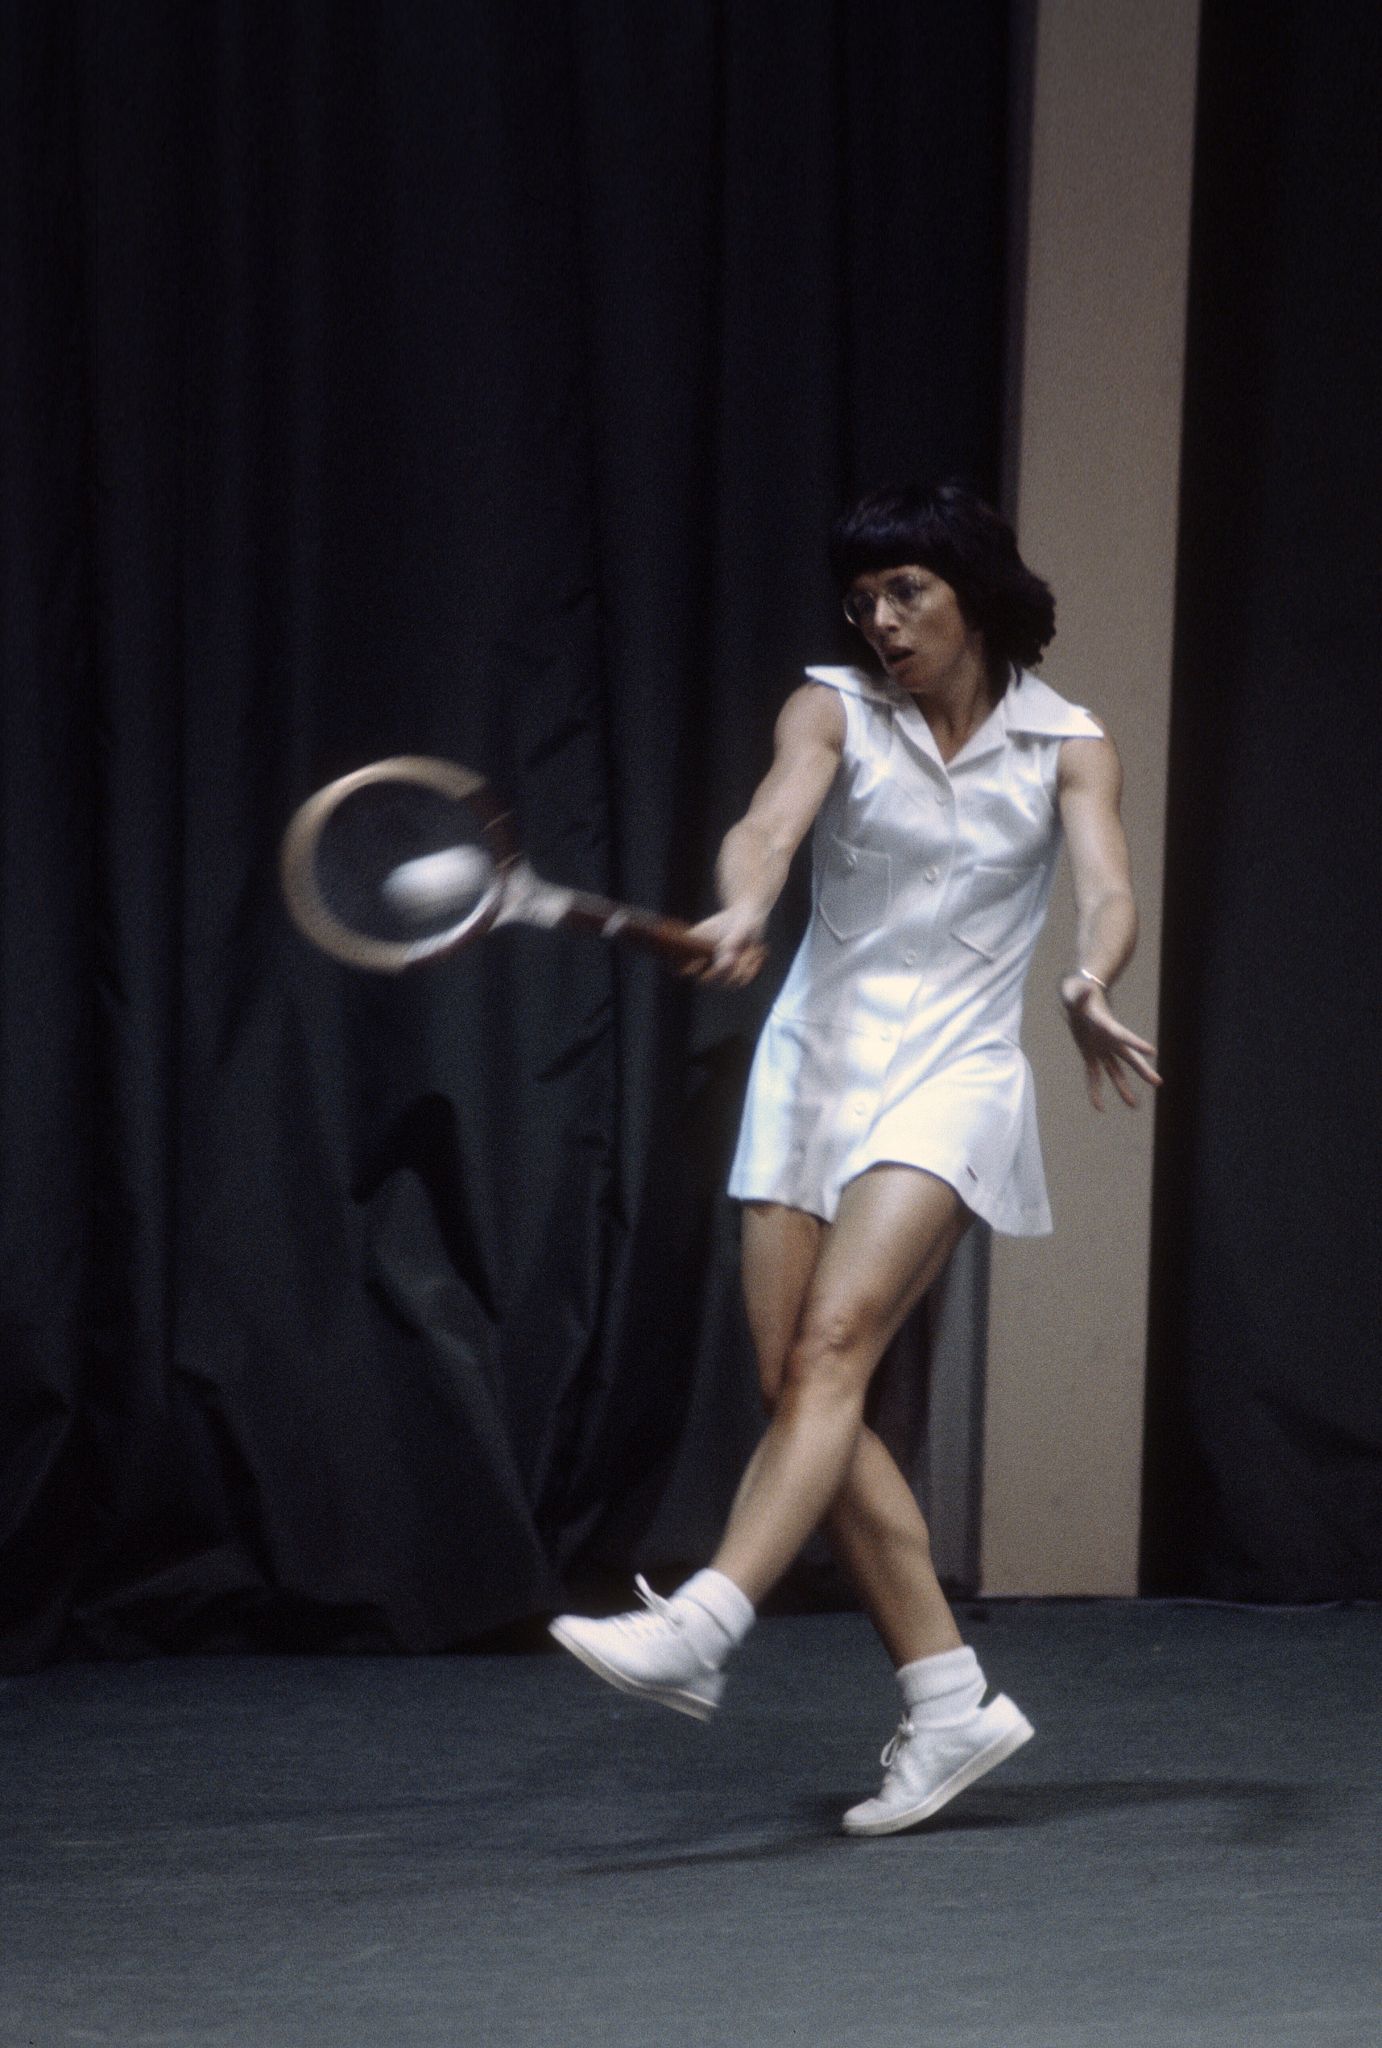 Battle of the Sexes cast: Real-life tennis players revealed, Gallery